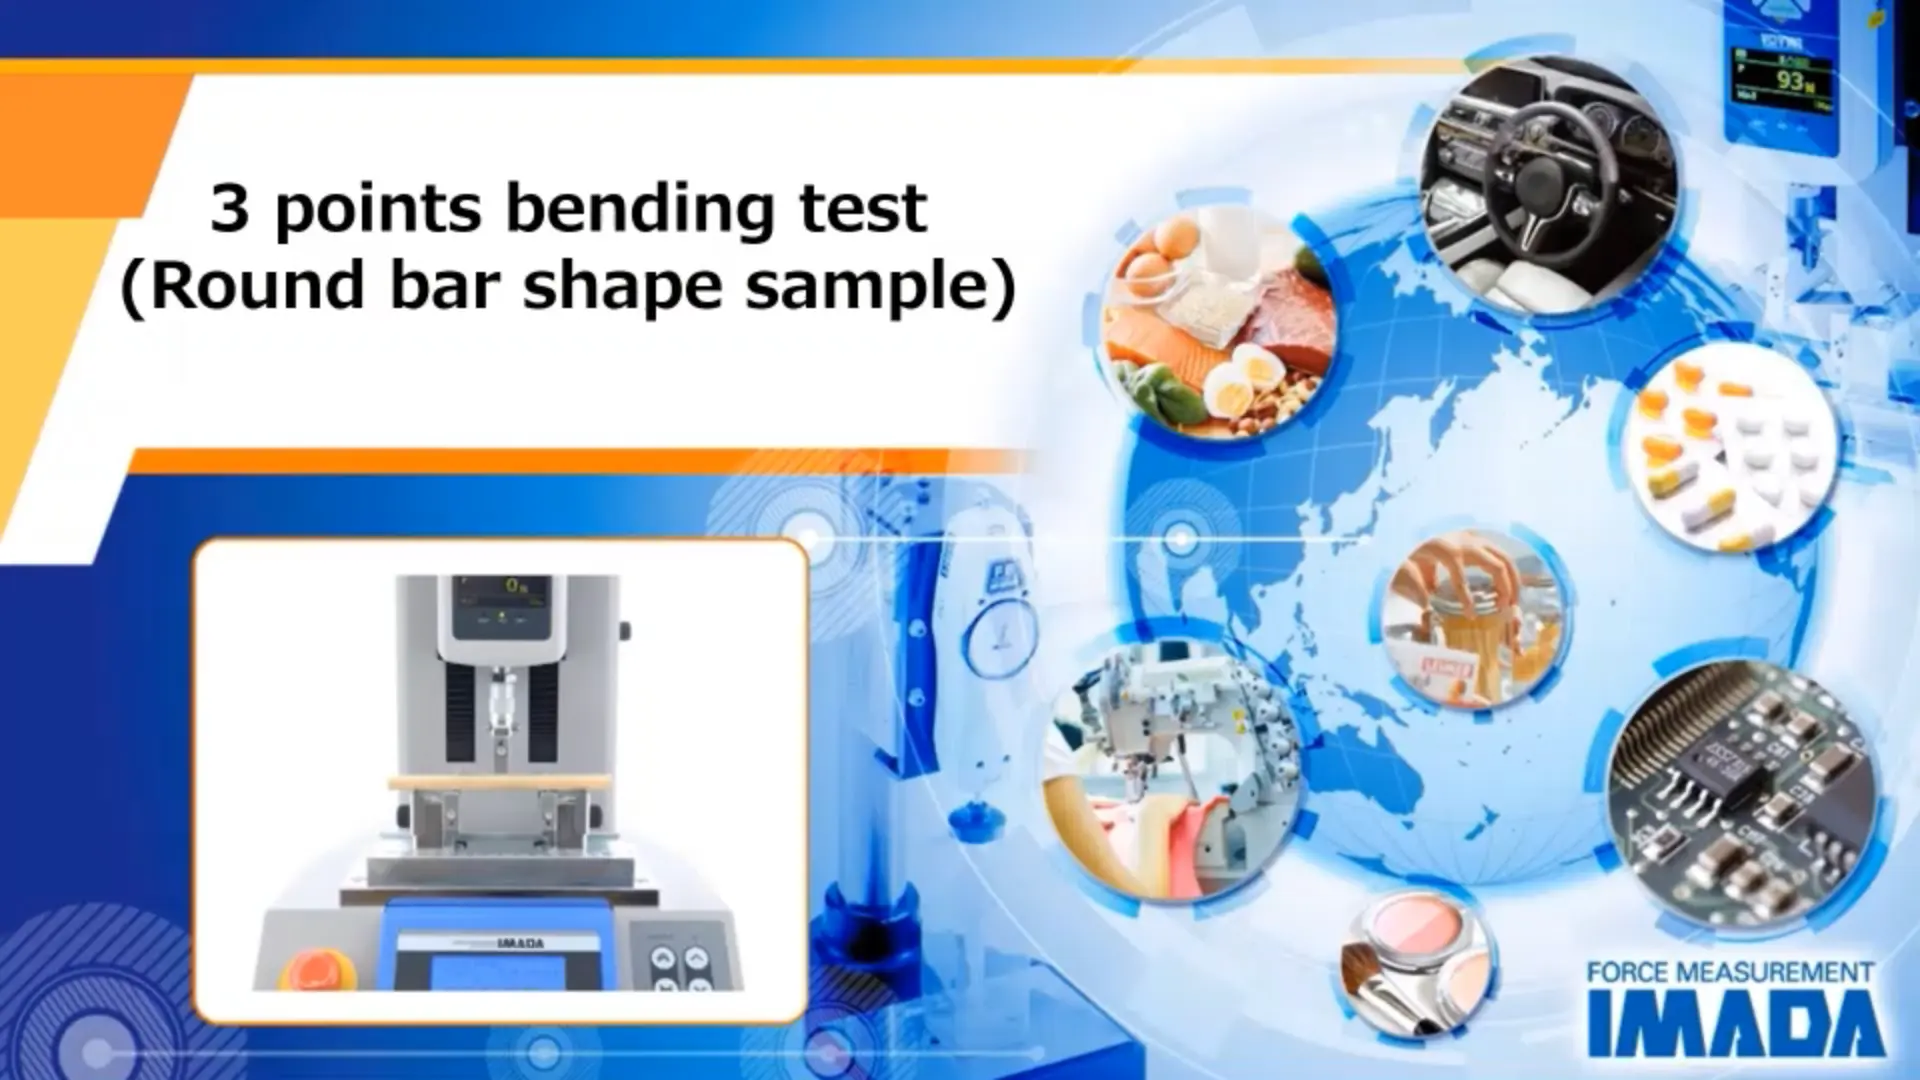 3-Point bending test of round bar shaped sample